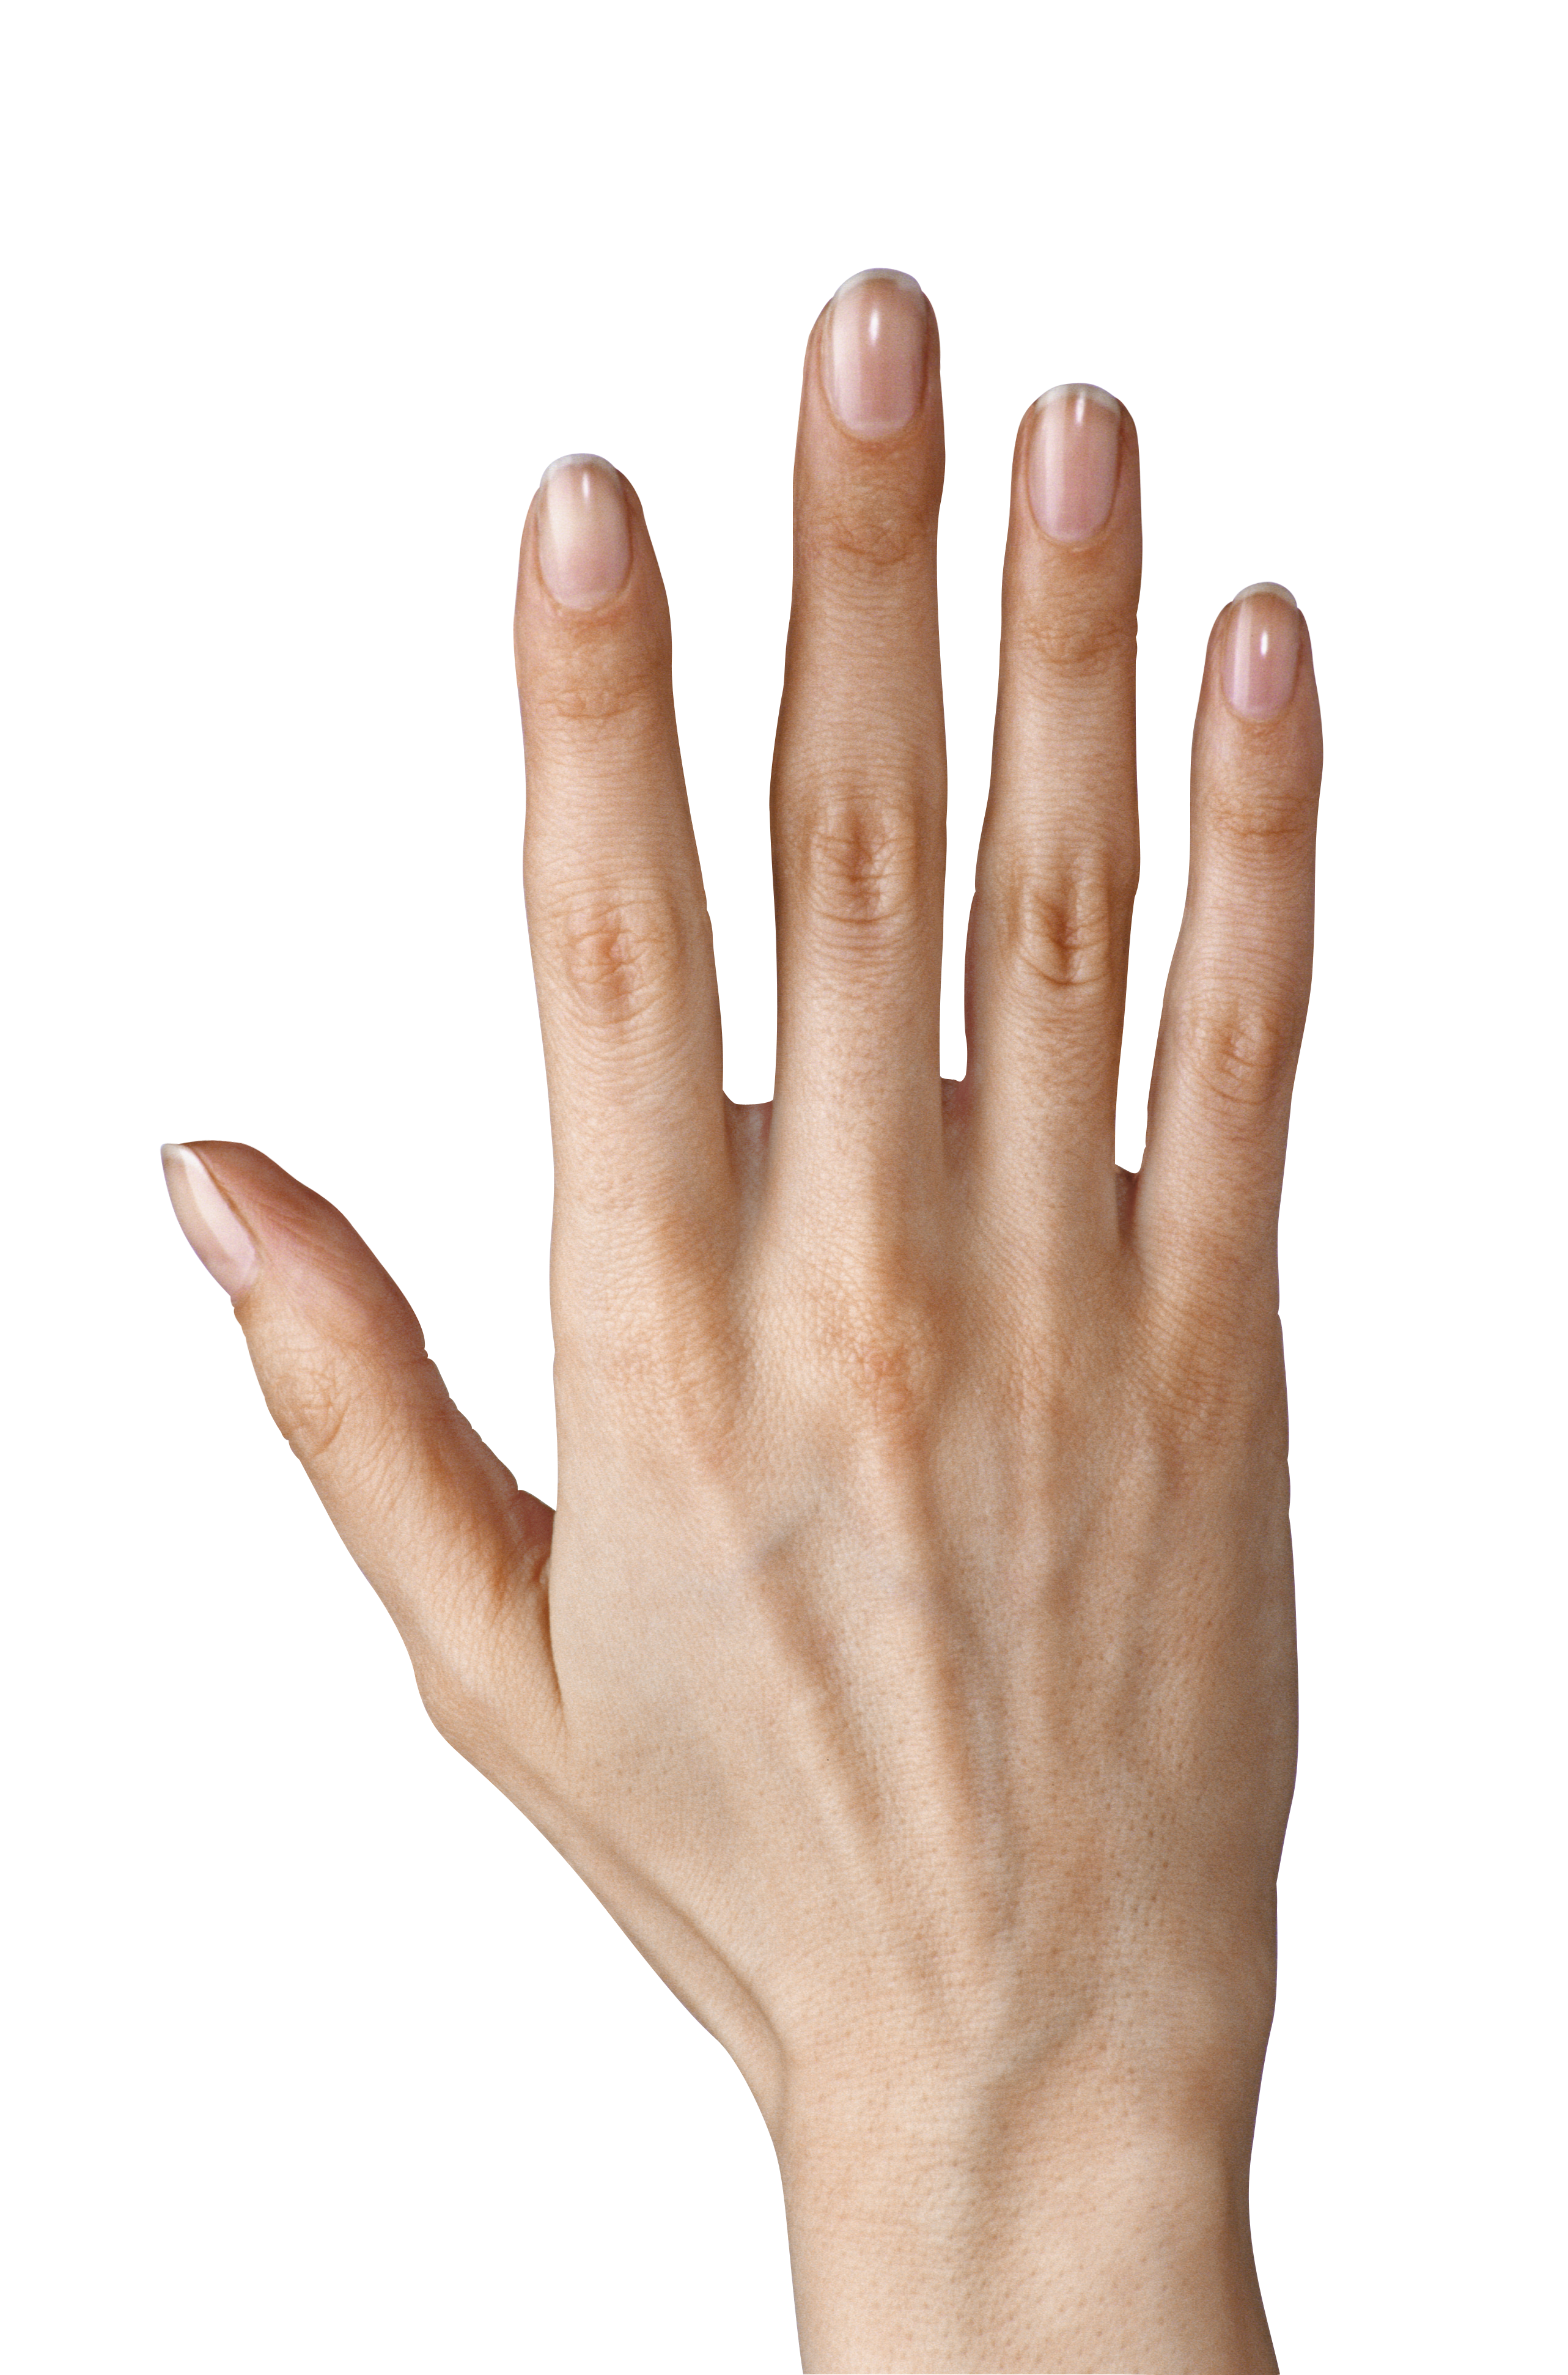 Showing five fingers png. Hand clipart transparent background